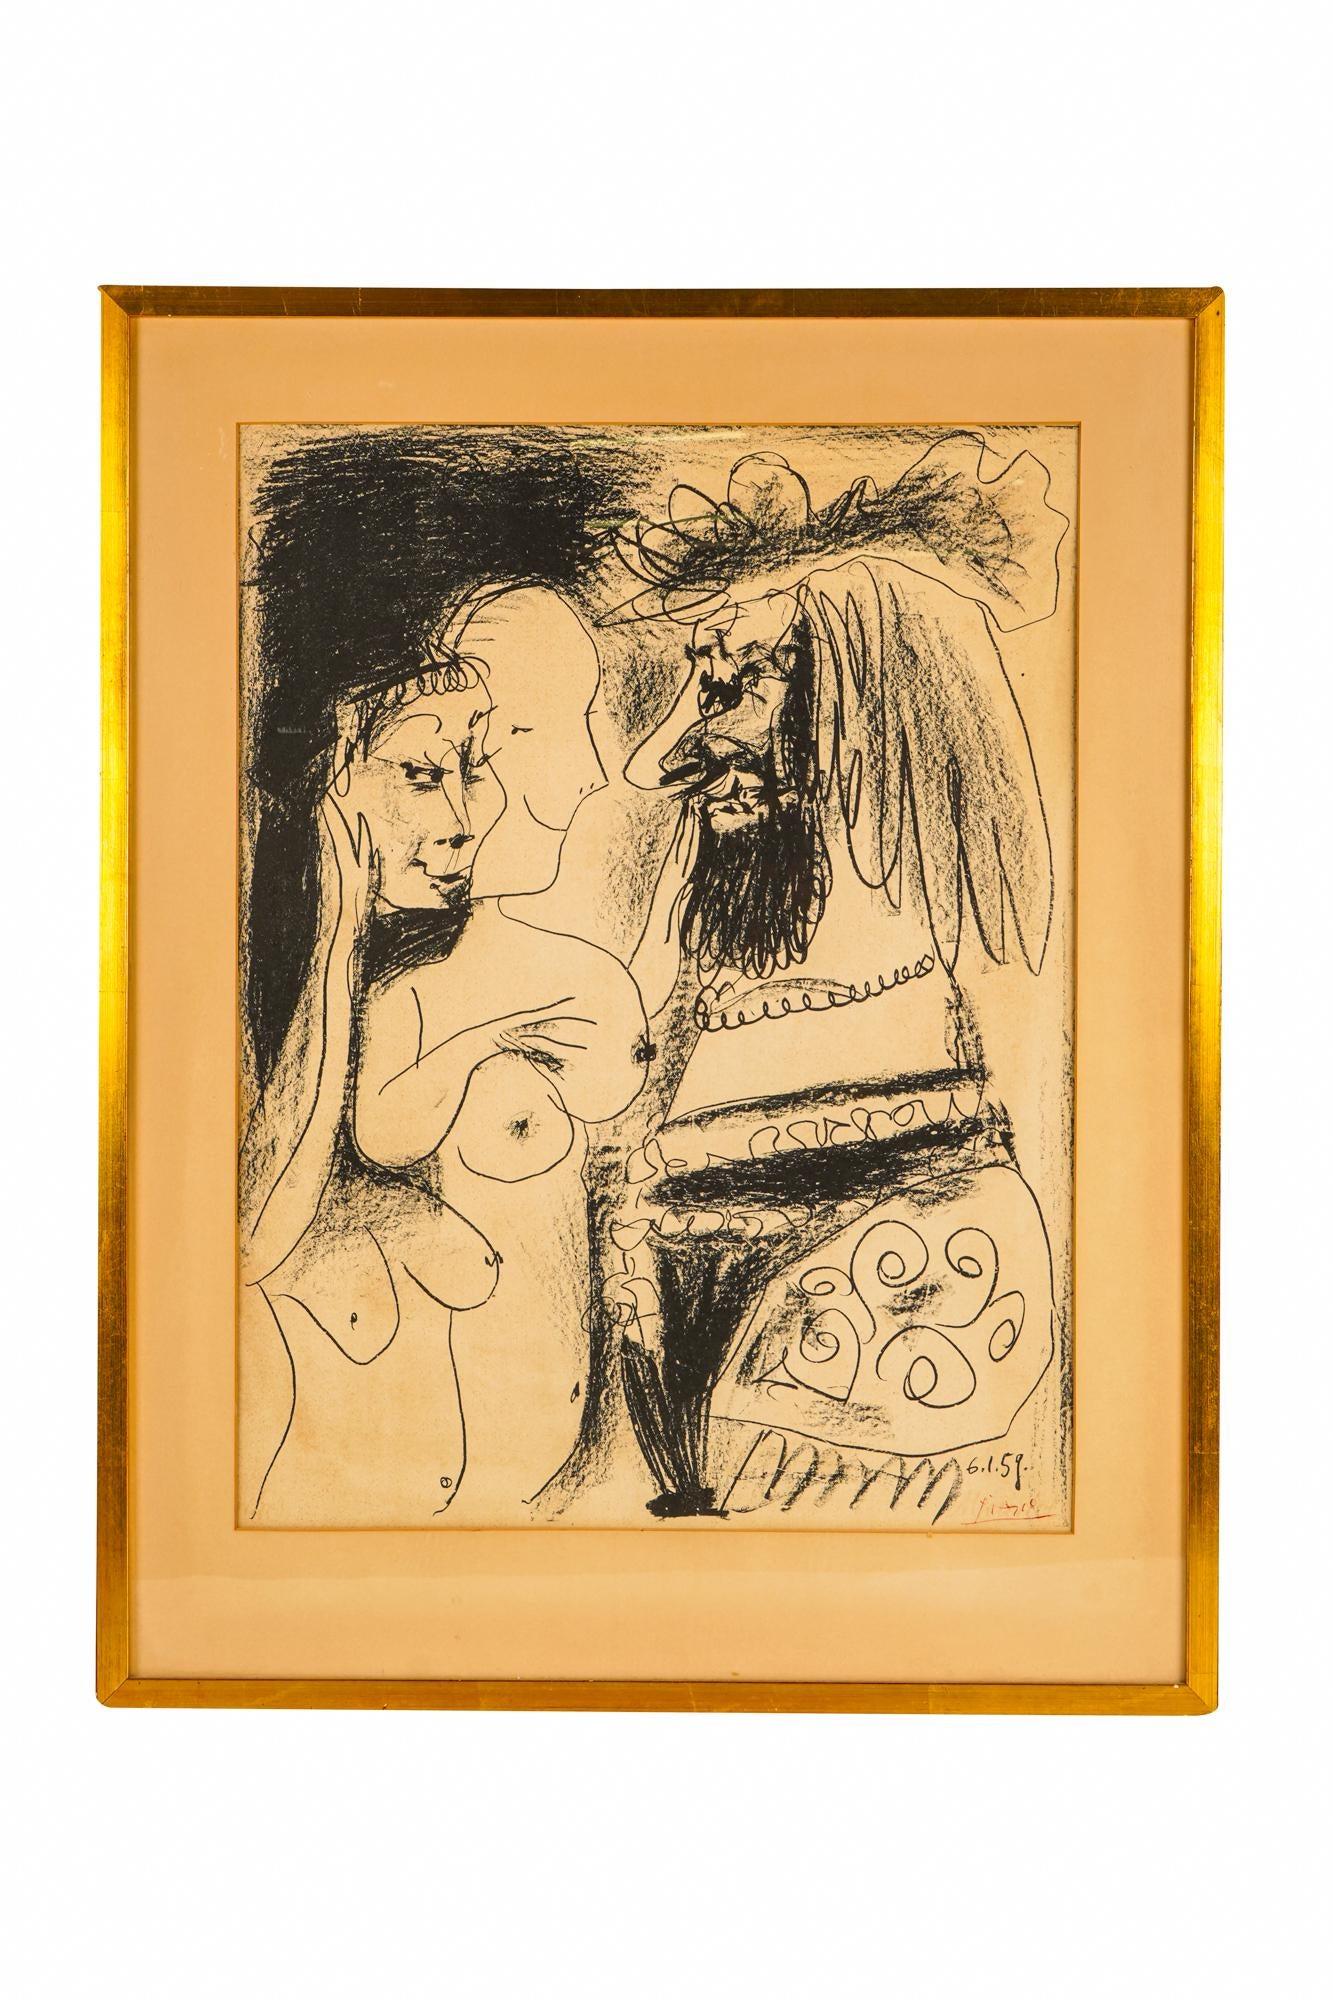 PABLO PICASSO LE VIEUX ROI FROM 1959 IN ORIGINAL LITHOGRAPH  - Print by Pablo Picasso